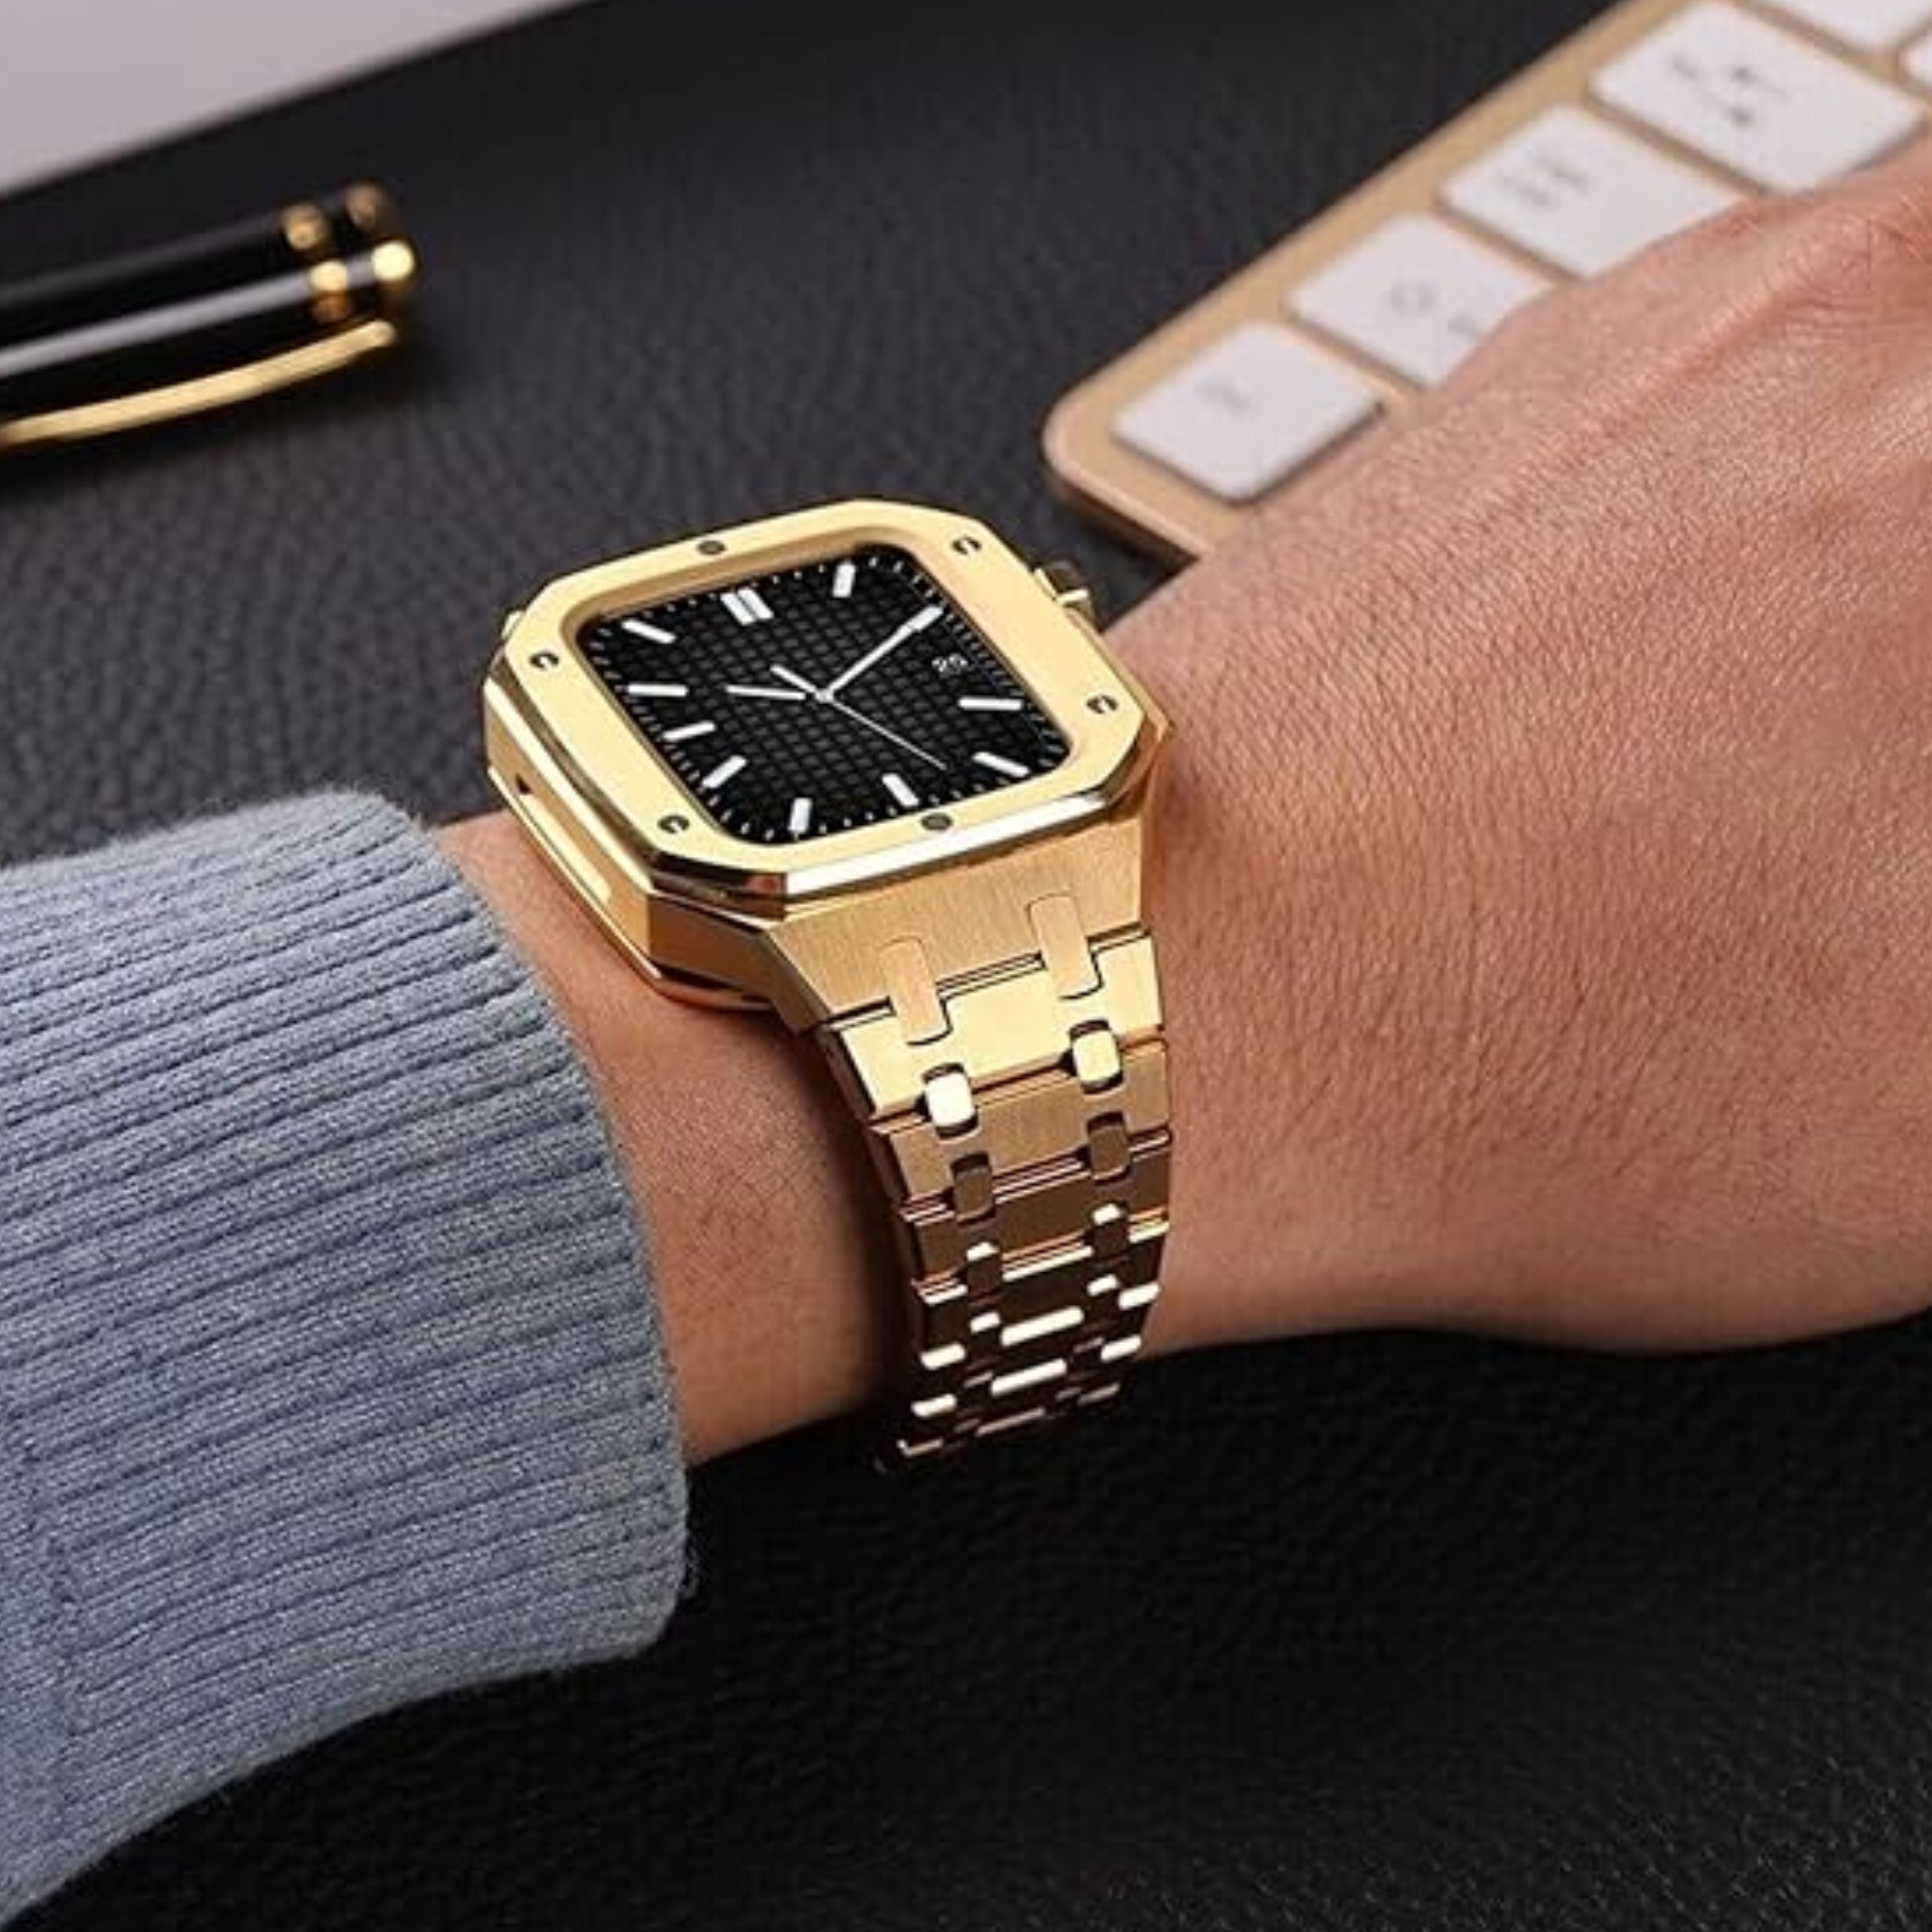 Luxury Metal Mod Kit For Apple Watch | Case With Jewels, Rubber & Stainless Steel Straps | Apple Watch SE/3/4/5/6 Accessory - 45 Mm| Golden Case - Golden Band